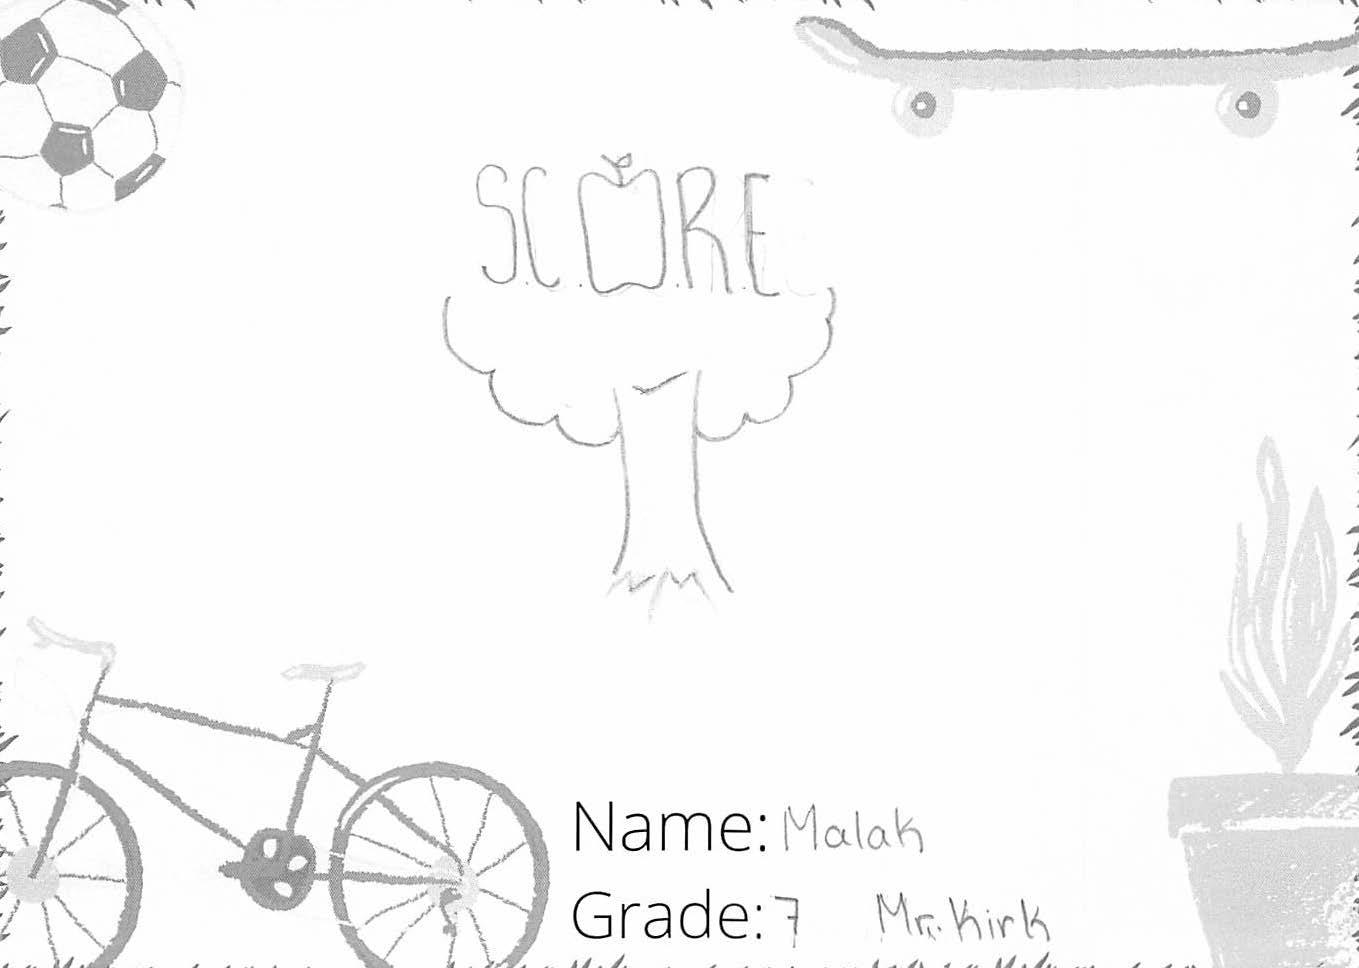 Pencil drawing for the SCORE! logo contest. There is a tree and apple incorporated with the word: SCORE